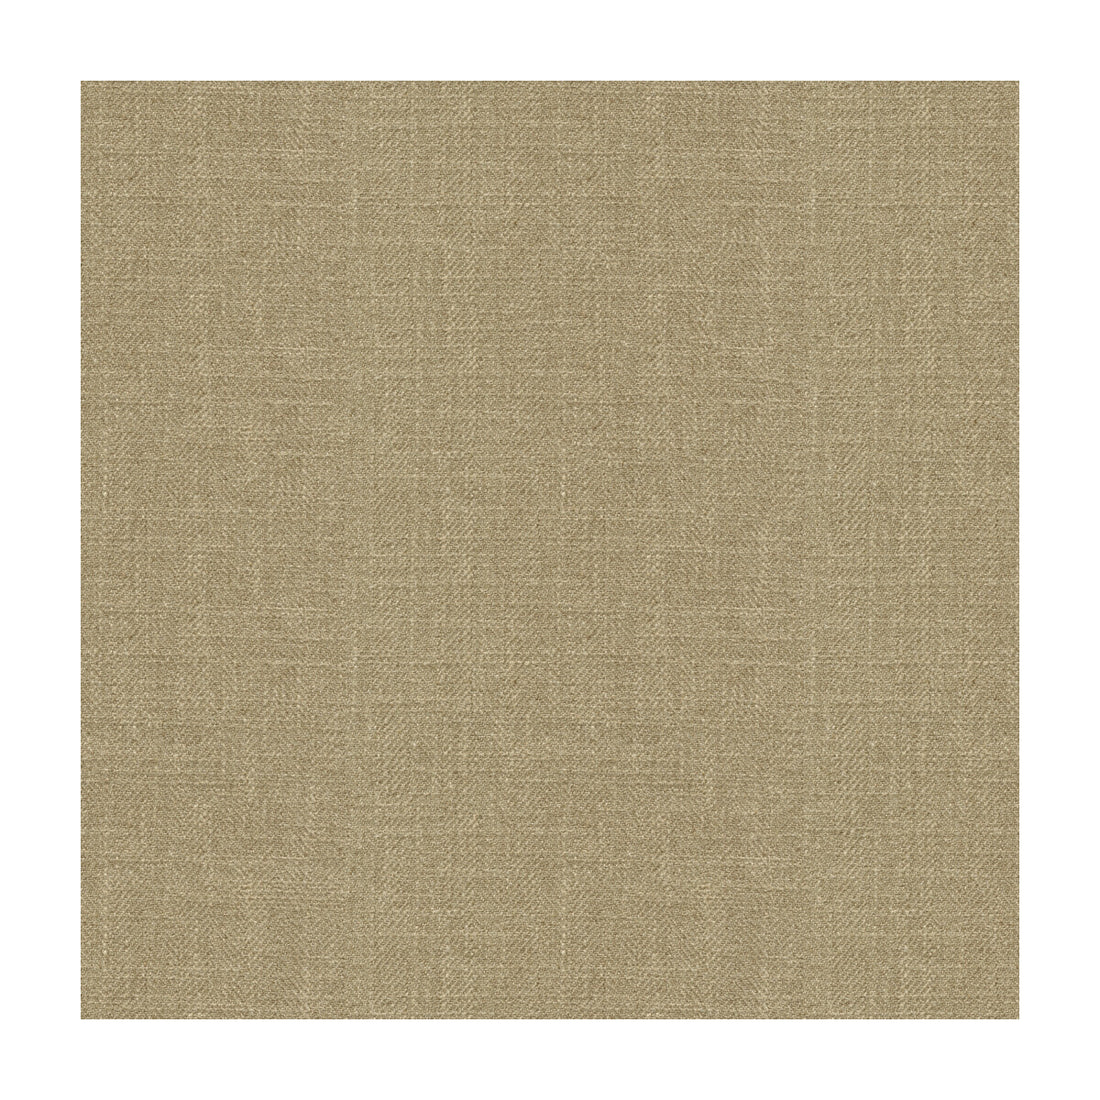 Kravet Basics fabric in 33842-106 color - pattern 33842.106.0 - by Kravet Basics in the Perfect Plains collection